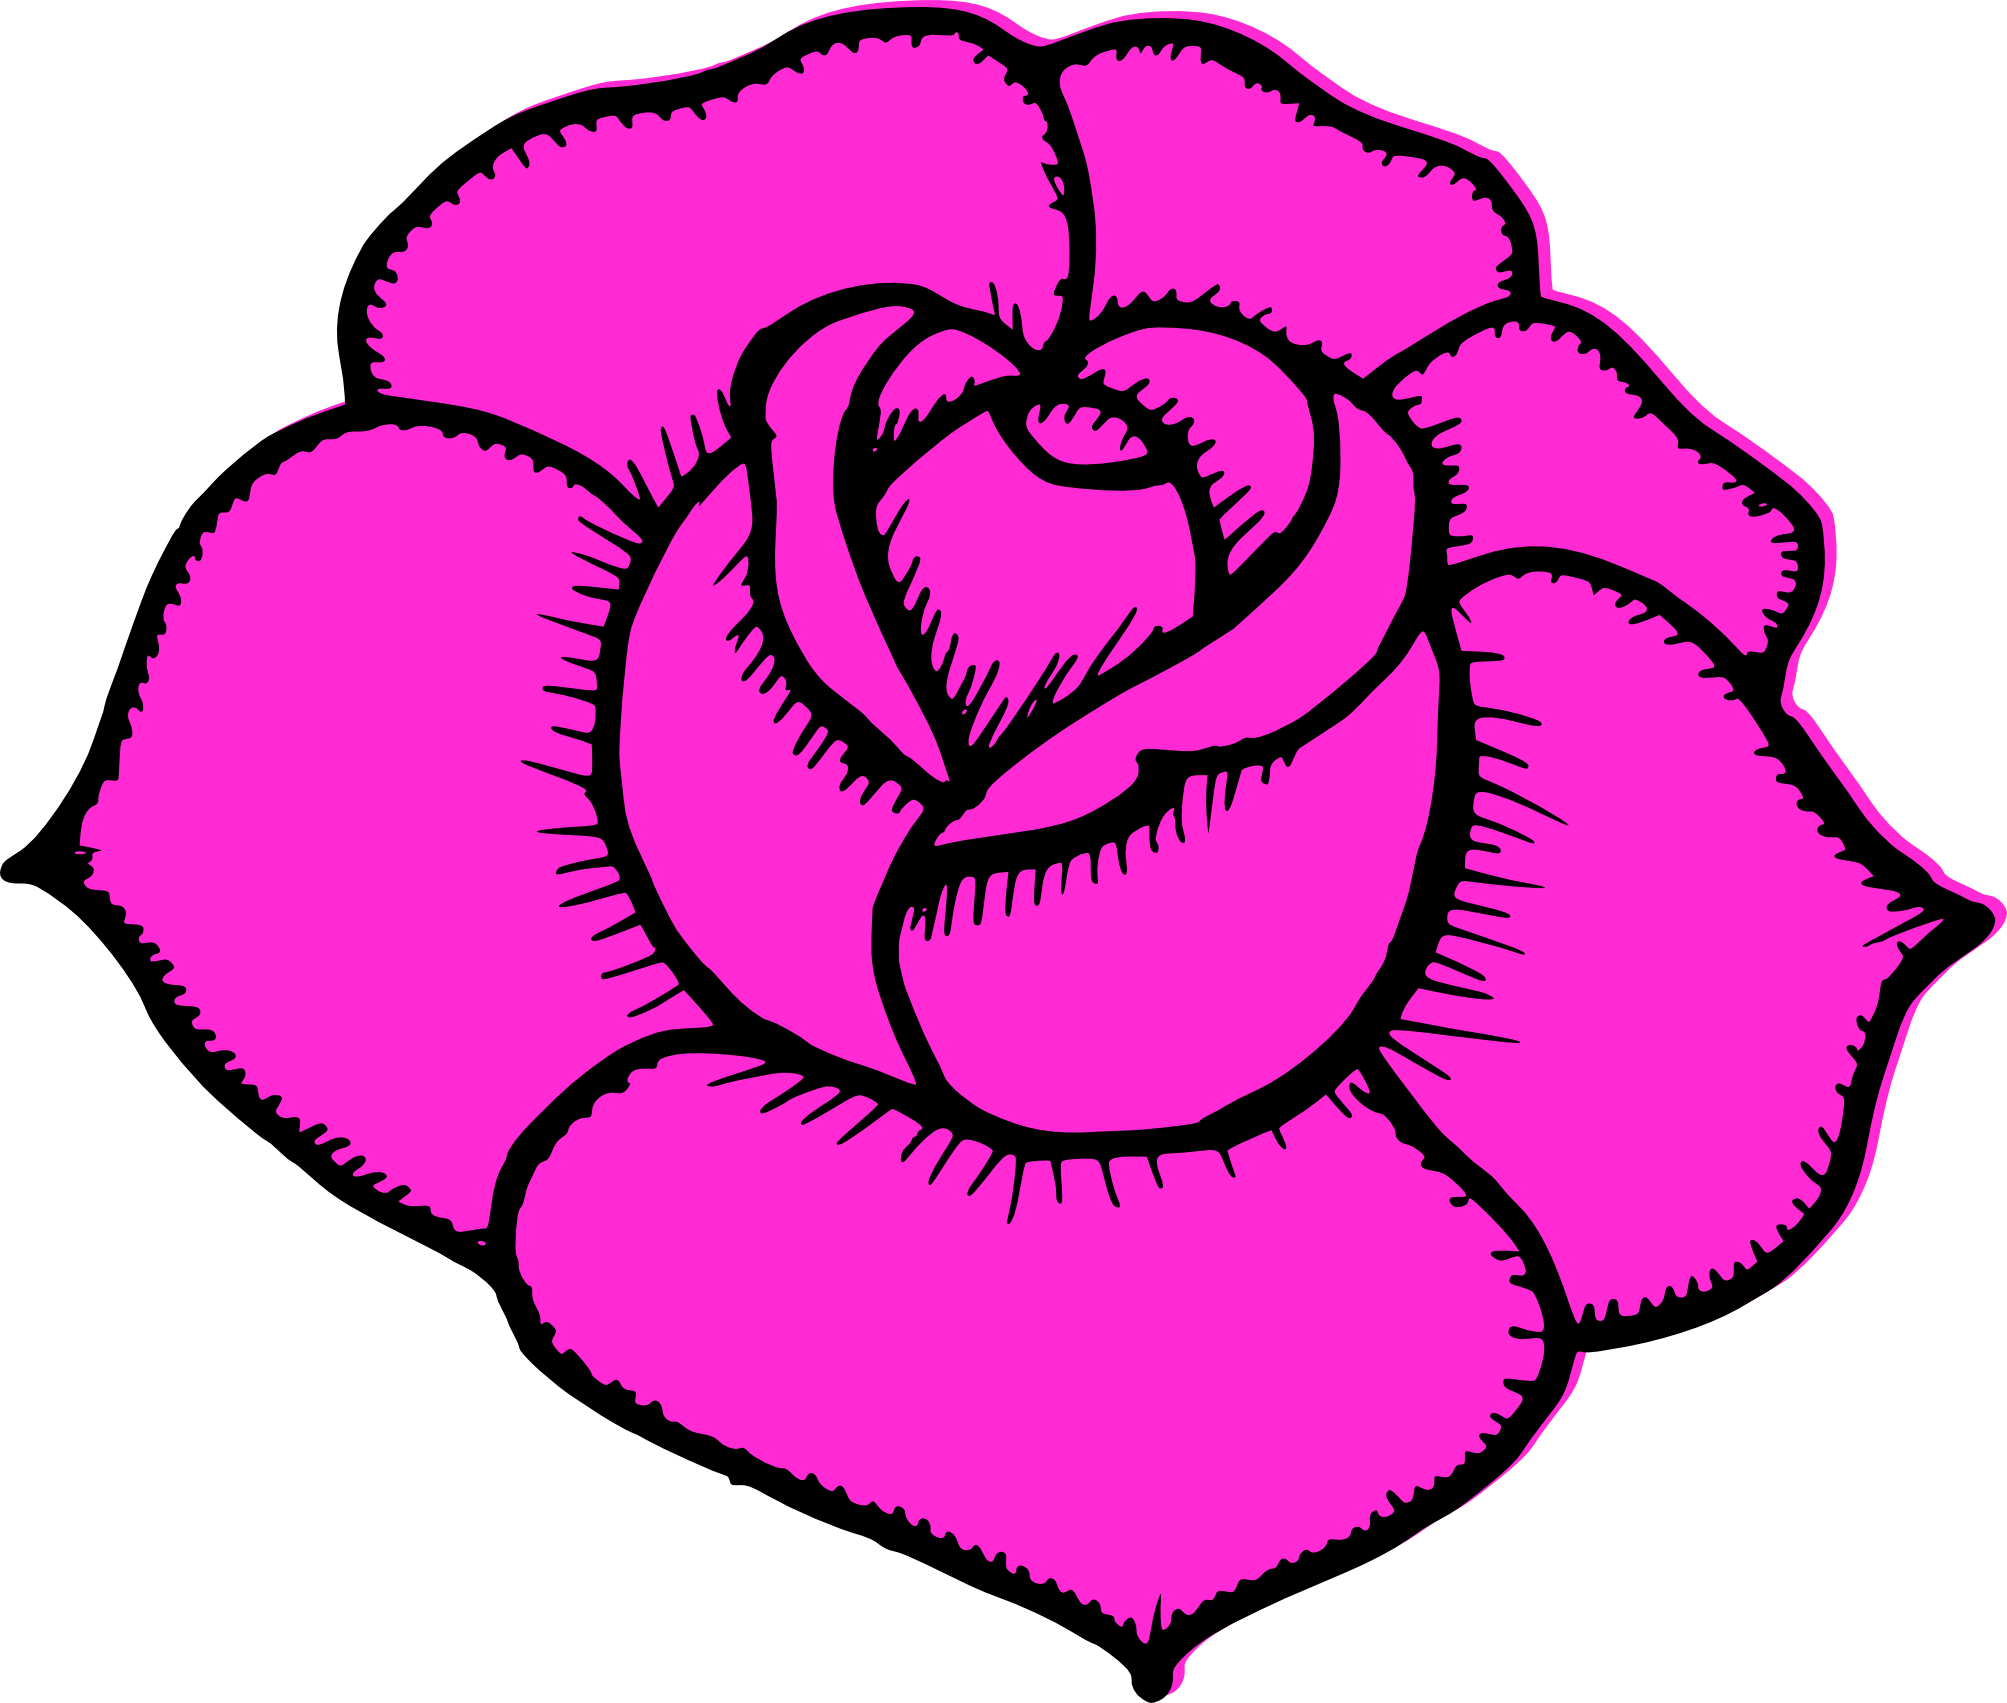 Rose Outline Drawing Easy - Outline Rose Tattoo Drawing Flowers Roses ...